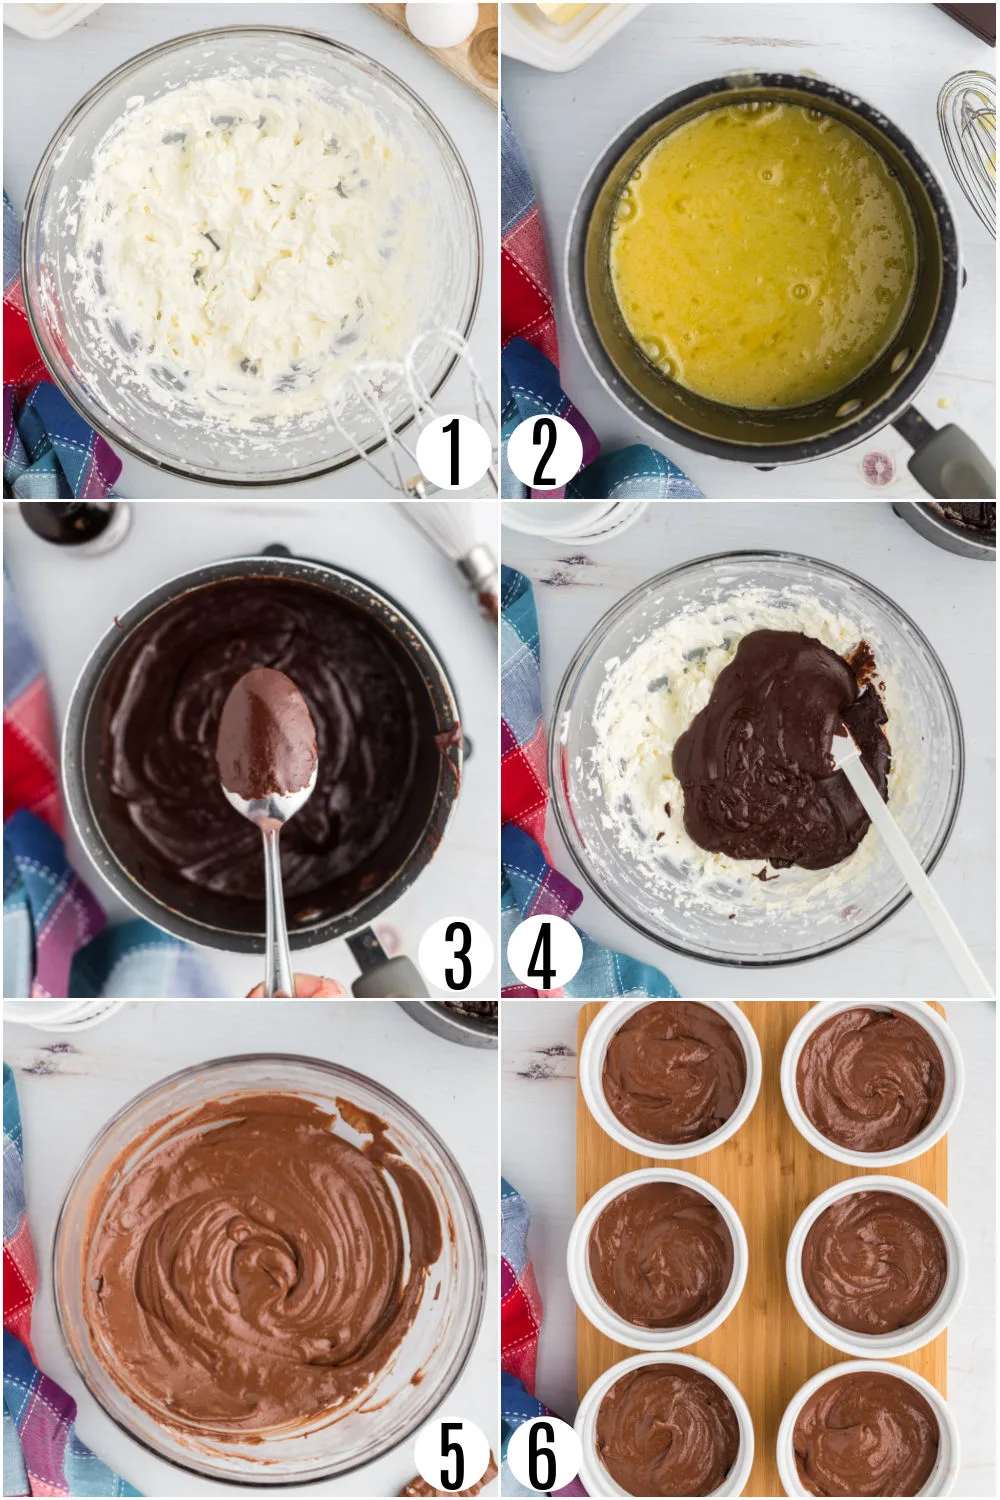 Step by step photos showing how to make sugar free chocolate pudding.